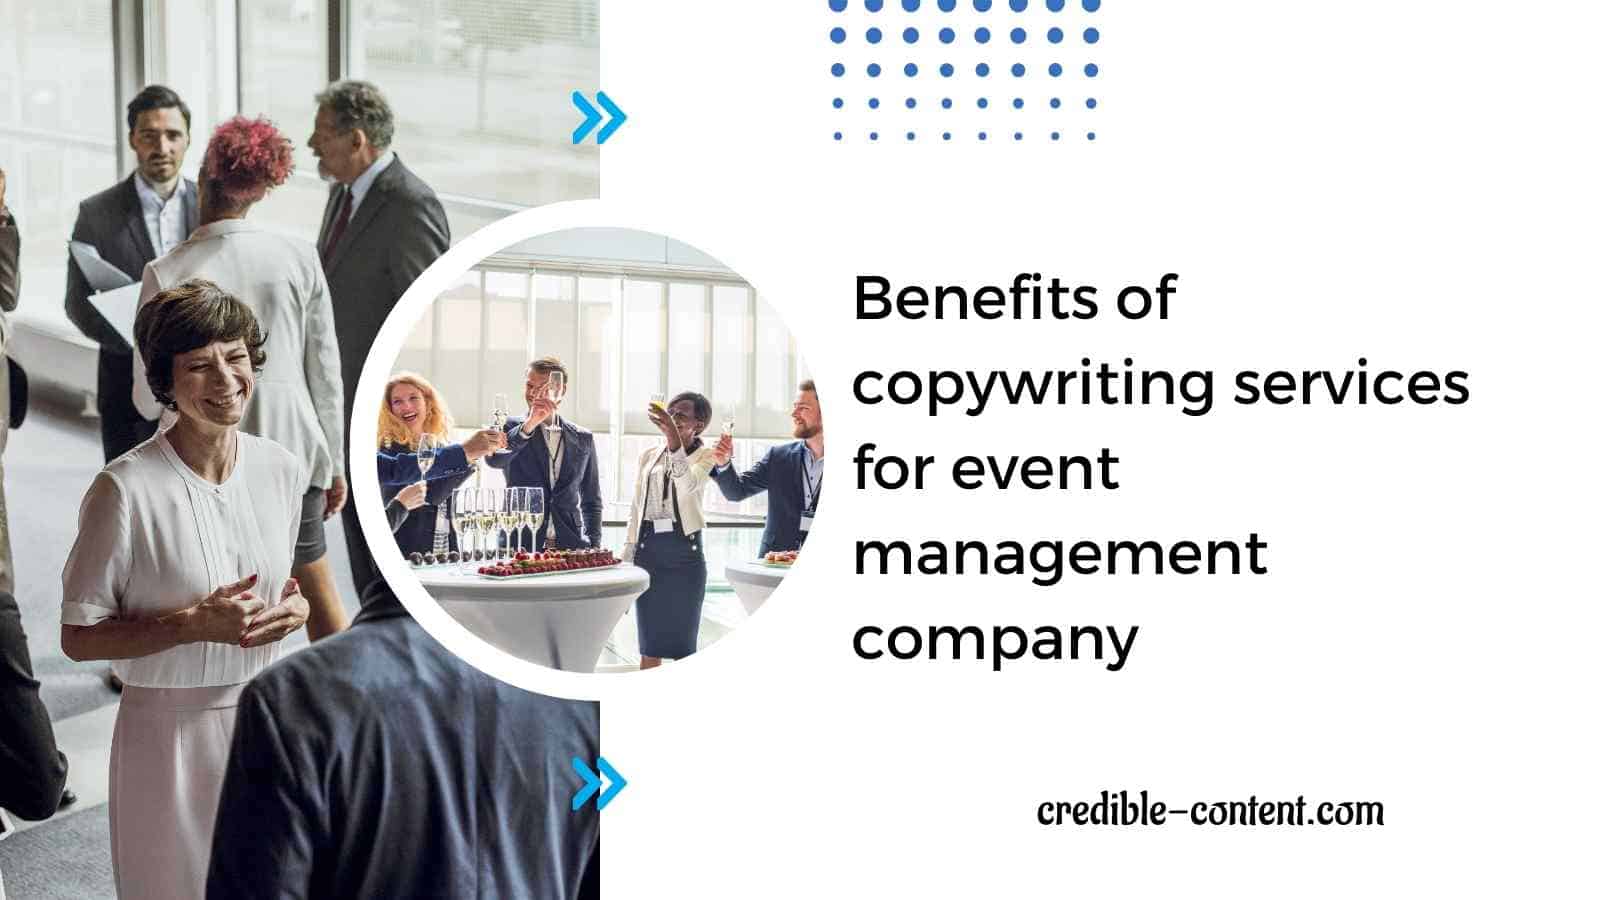 Benefits of copywriting services for event management company